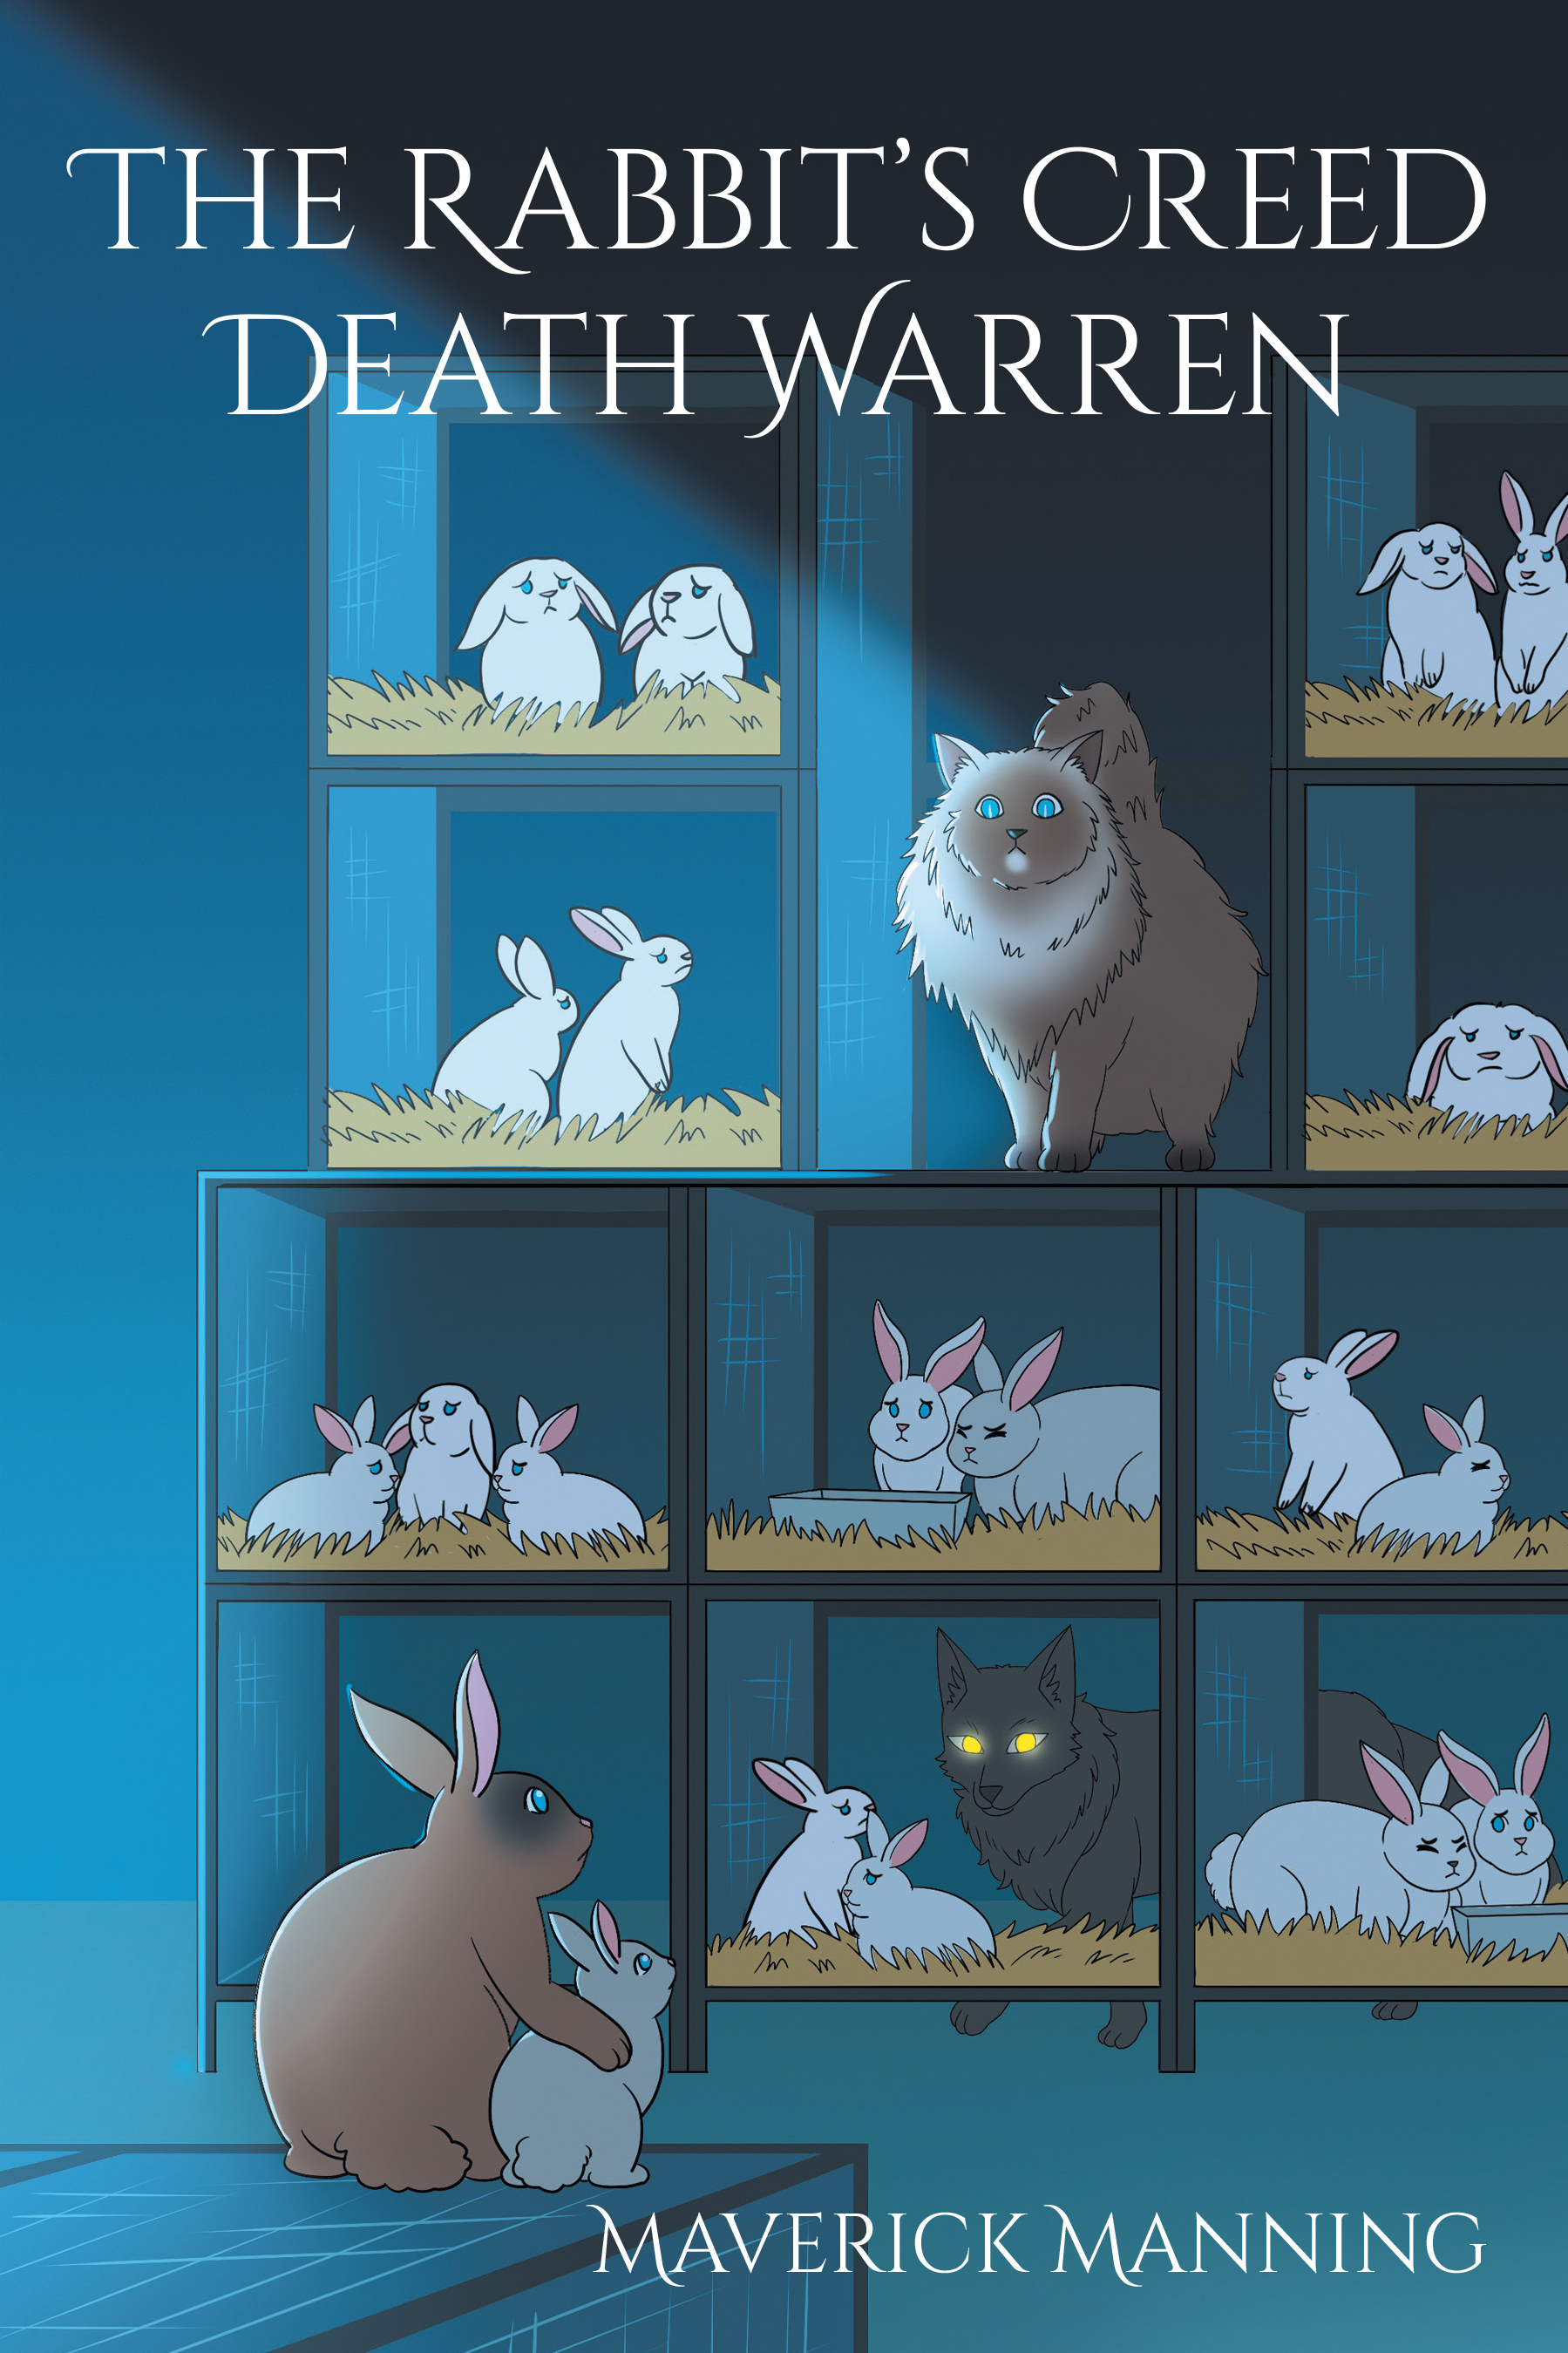 Author Maverick Manning’s New Book, "The Rabbit's Creed Death Warren," is an Exhilarating Tale of Survival and Resilience Following Five Rabbits Navigating the World